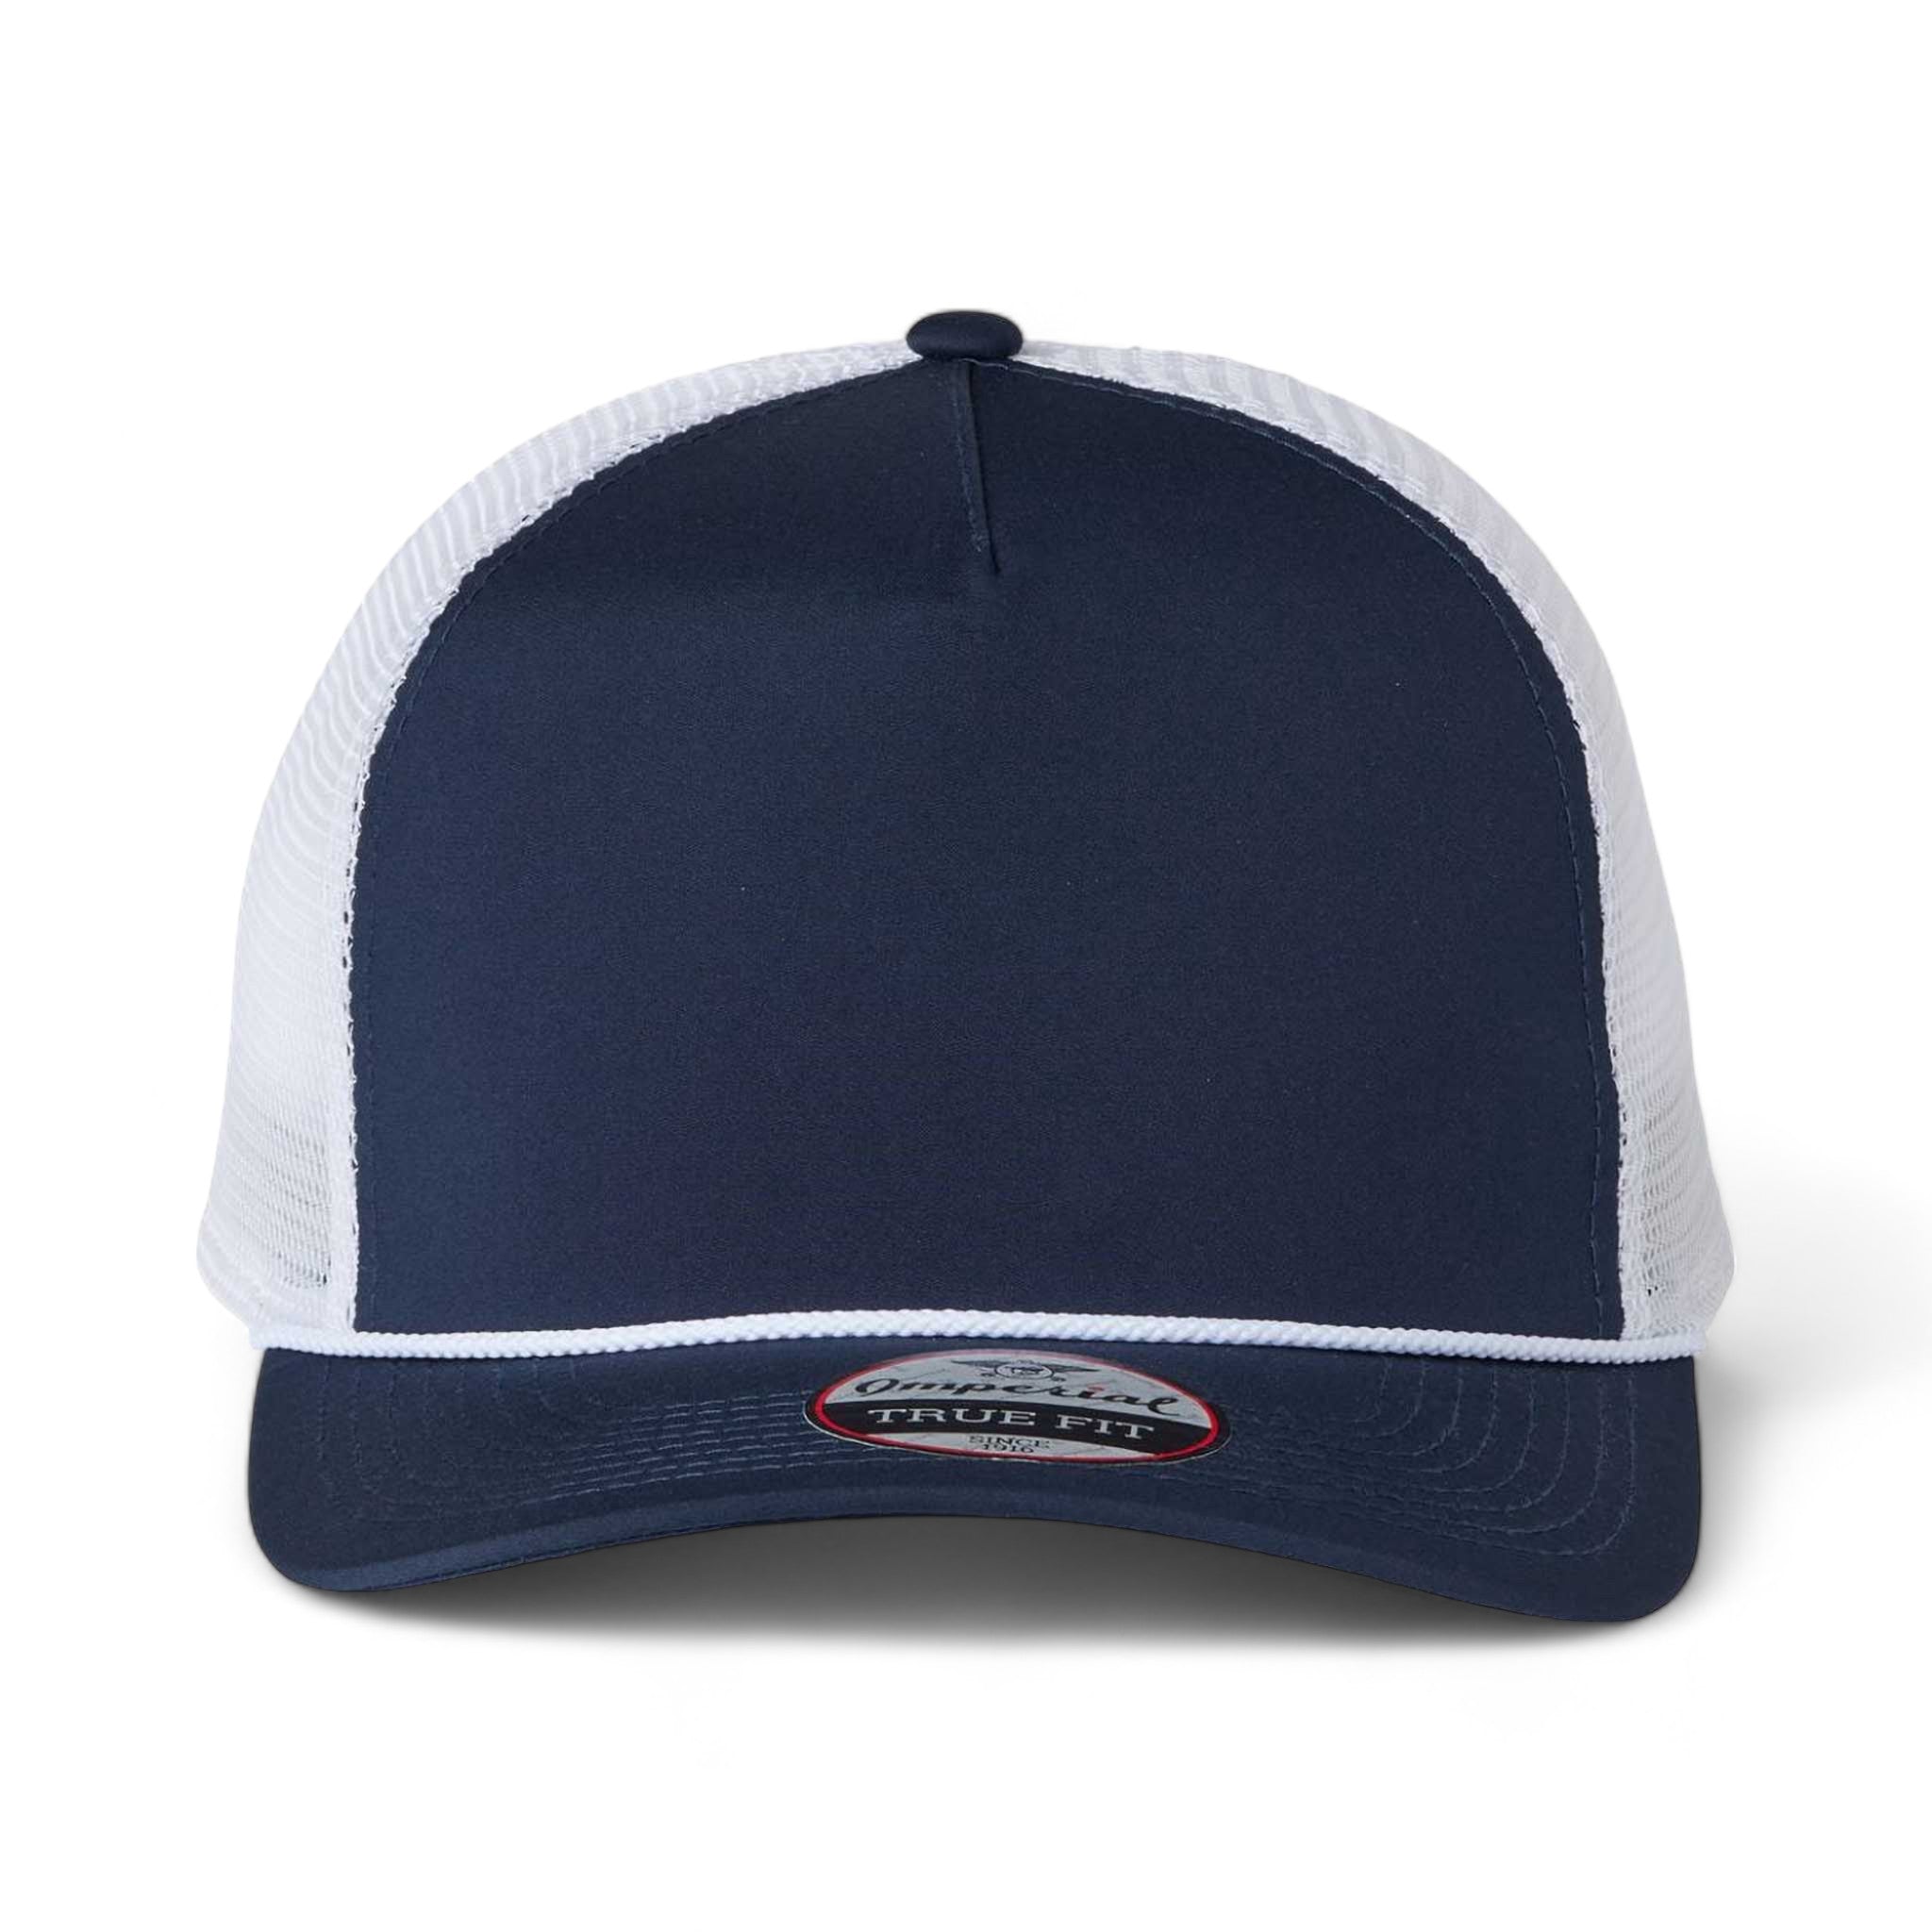 Front view of Imperial 5055 custom hat in navy, white and white